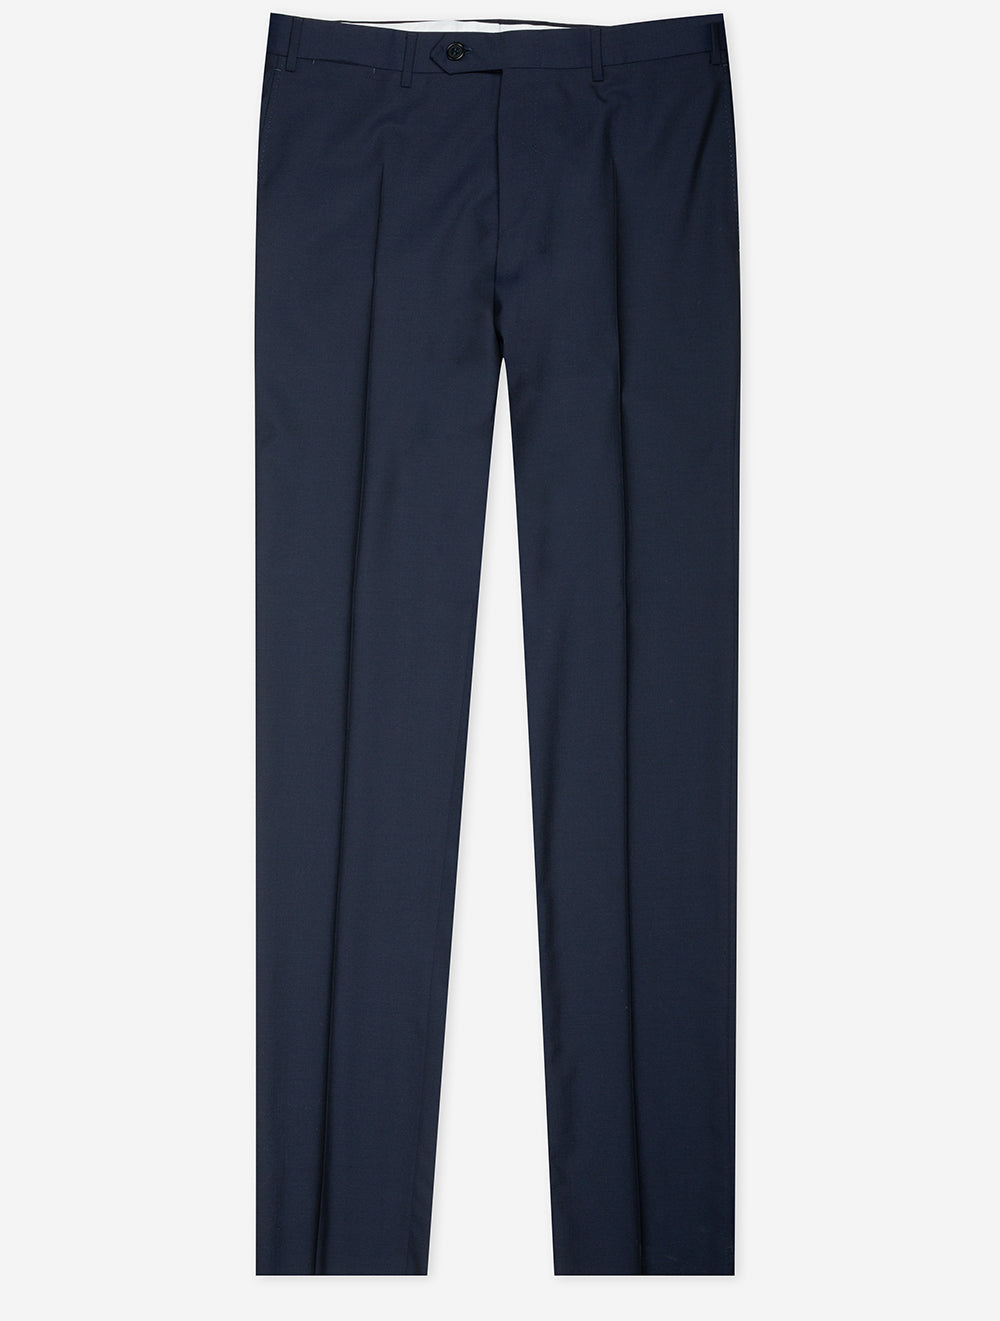 at00552ss24navy301E369canali_wool_trousers_1.jpg